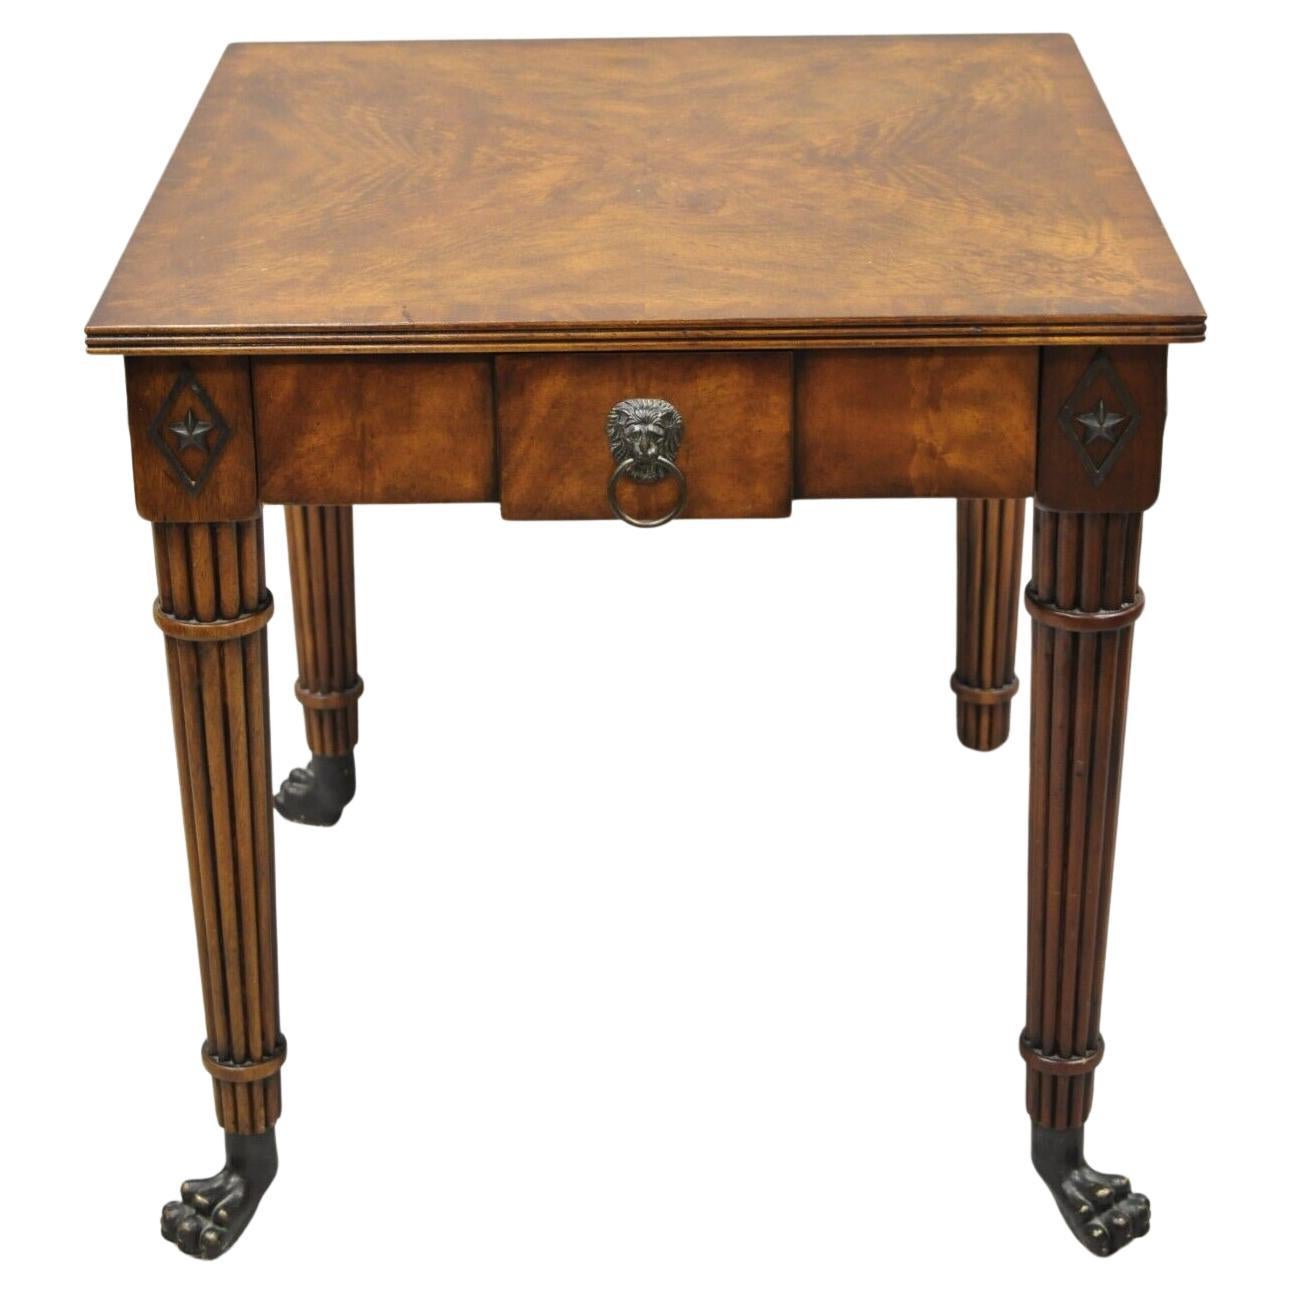 Theodore Alexander Althorp Regency Mahogany One Drawer Side Table A L50046 For Sale